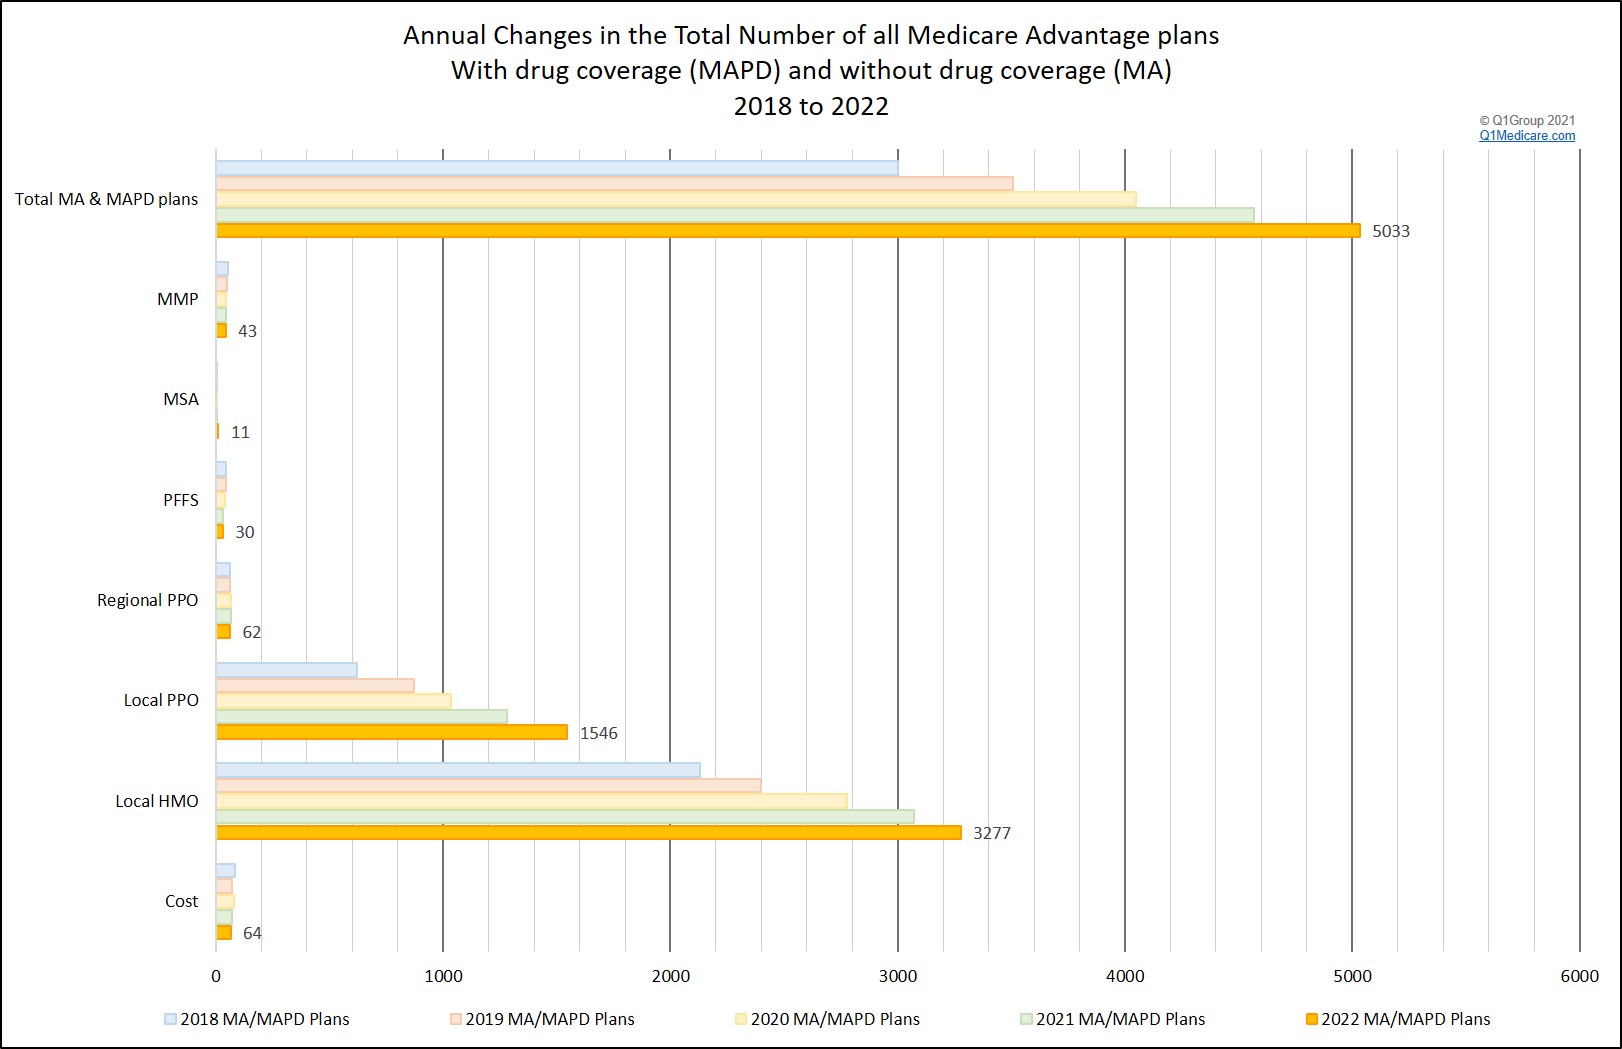 Total number of all Medicare Advantage plans available